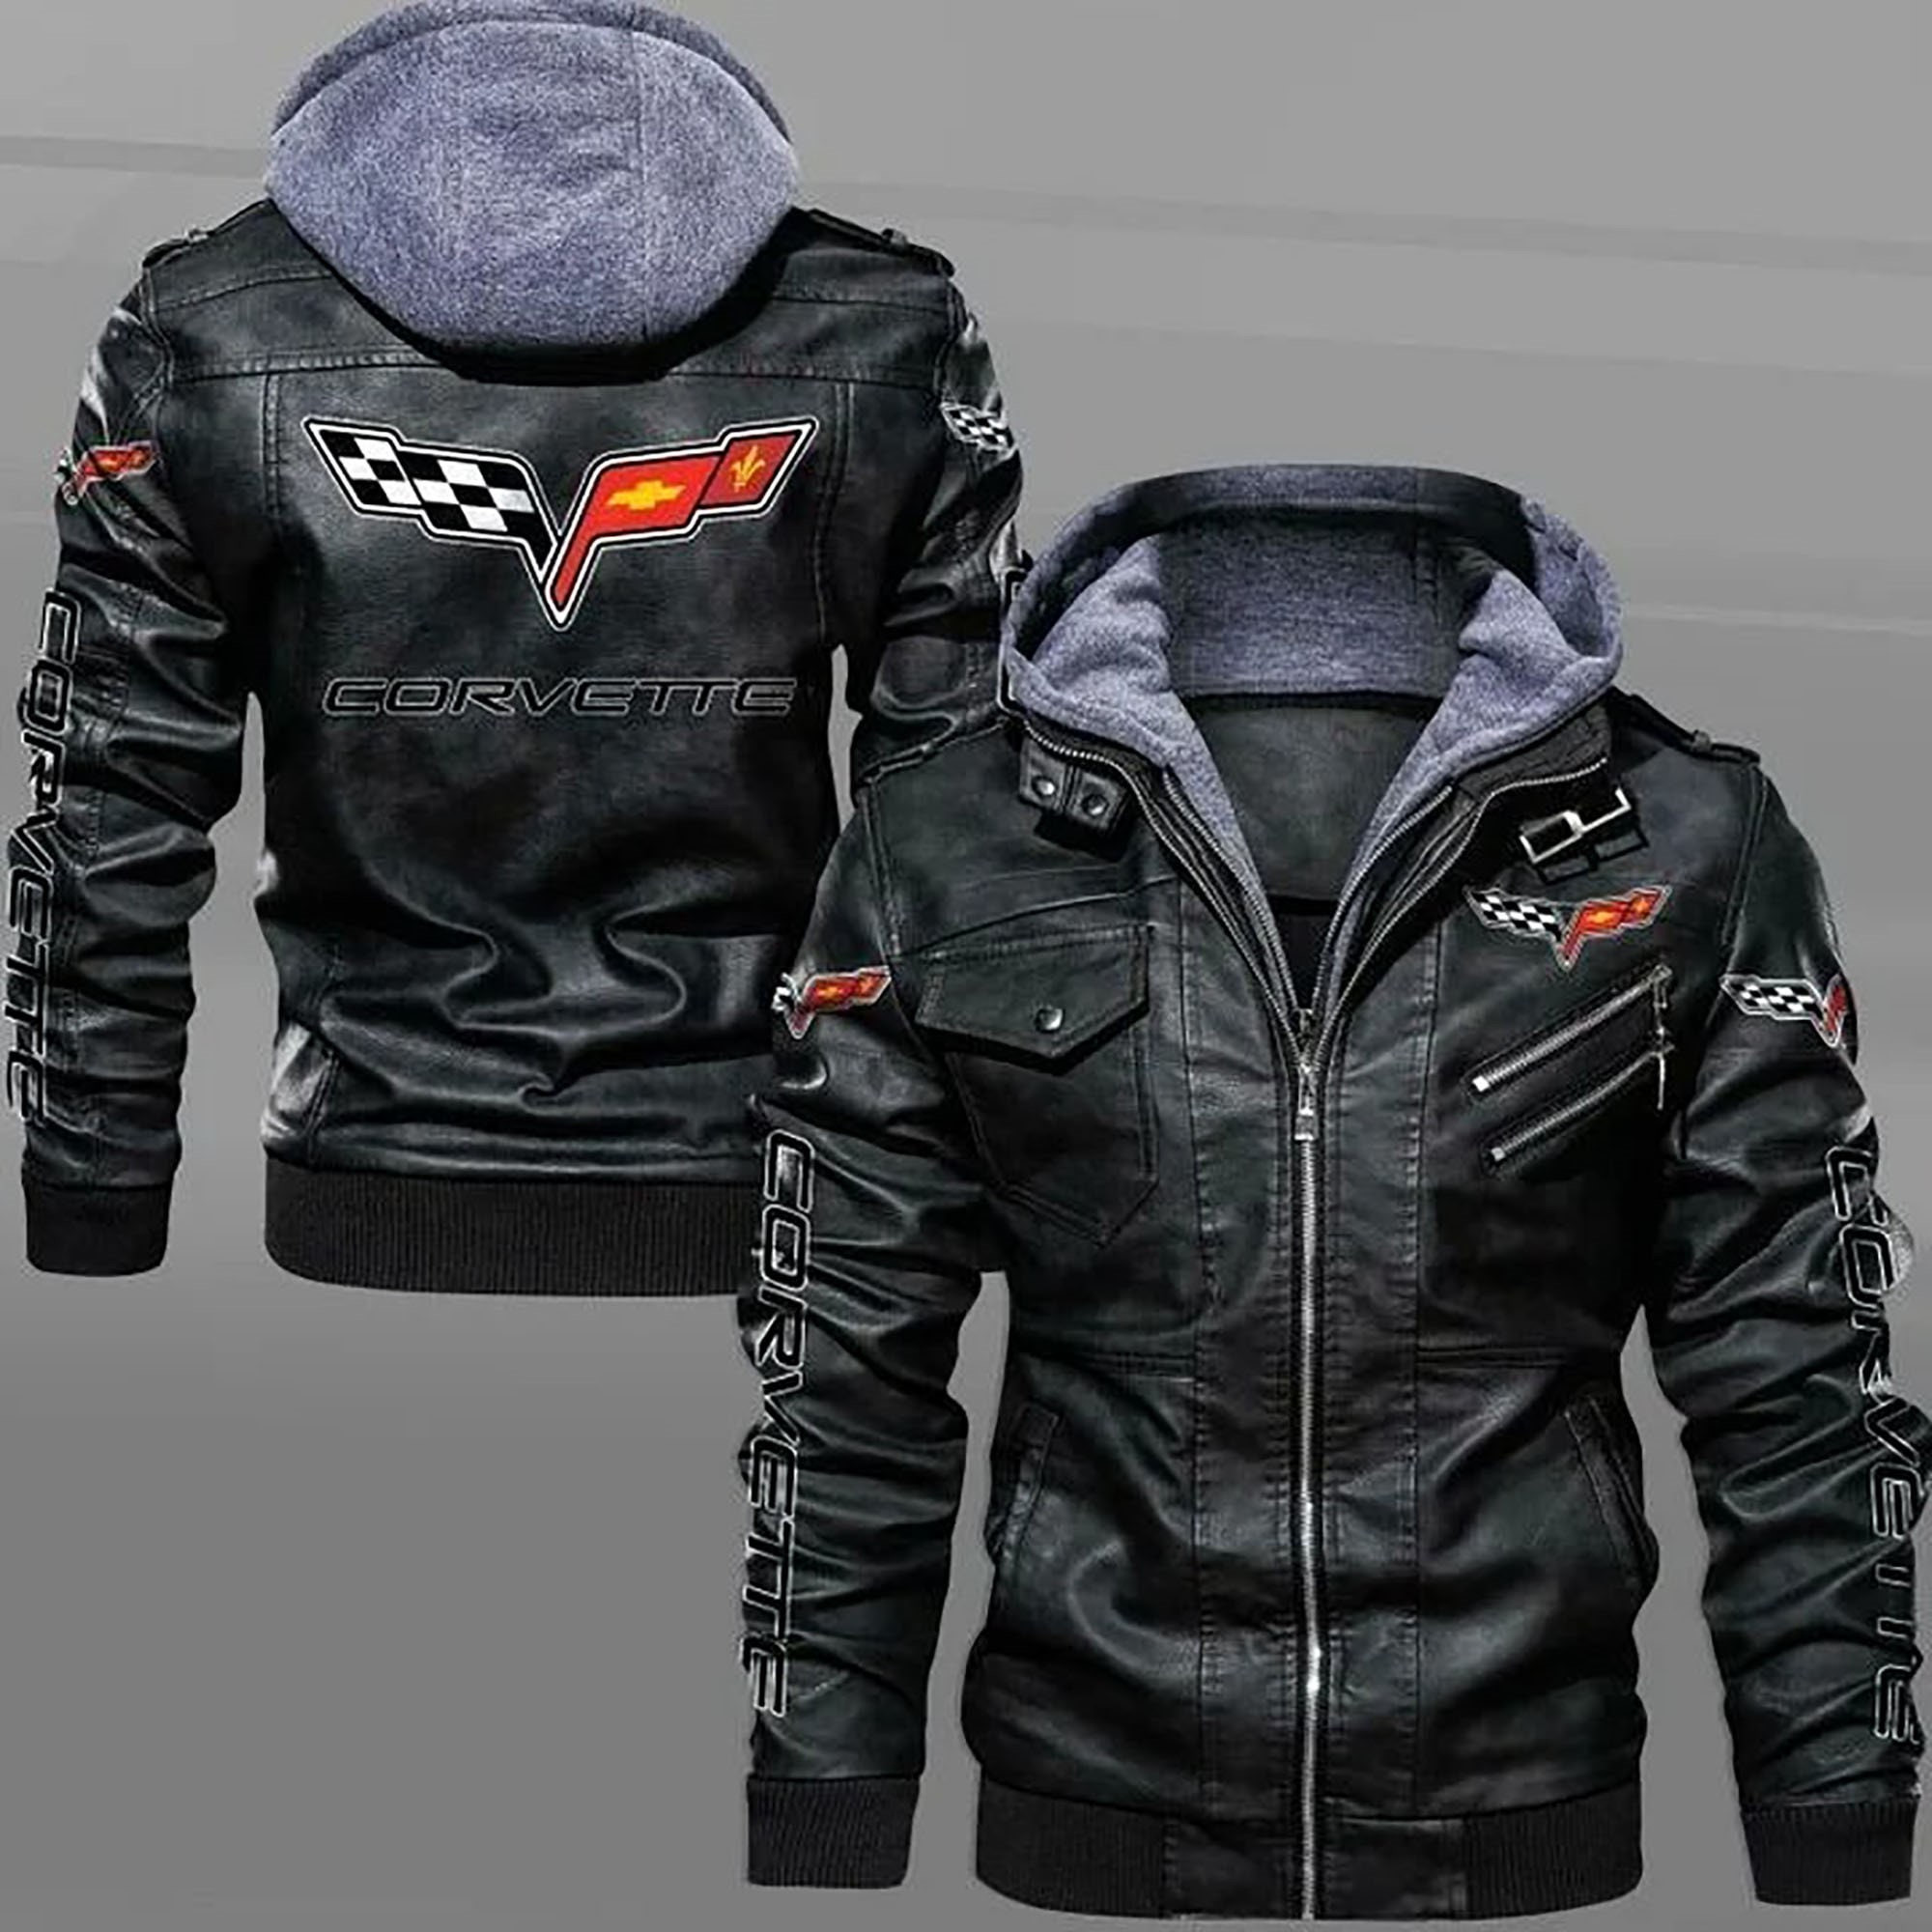 These Amazing Leather Jacket will add to the appeal of your outfit 425